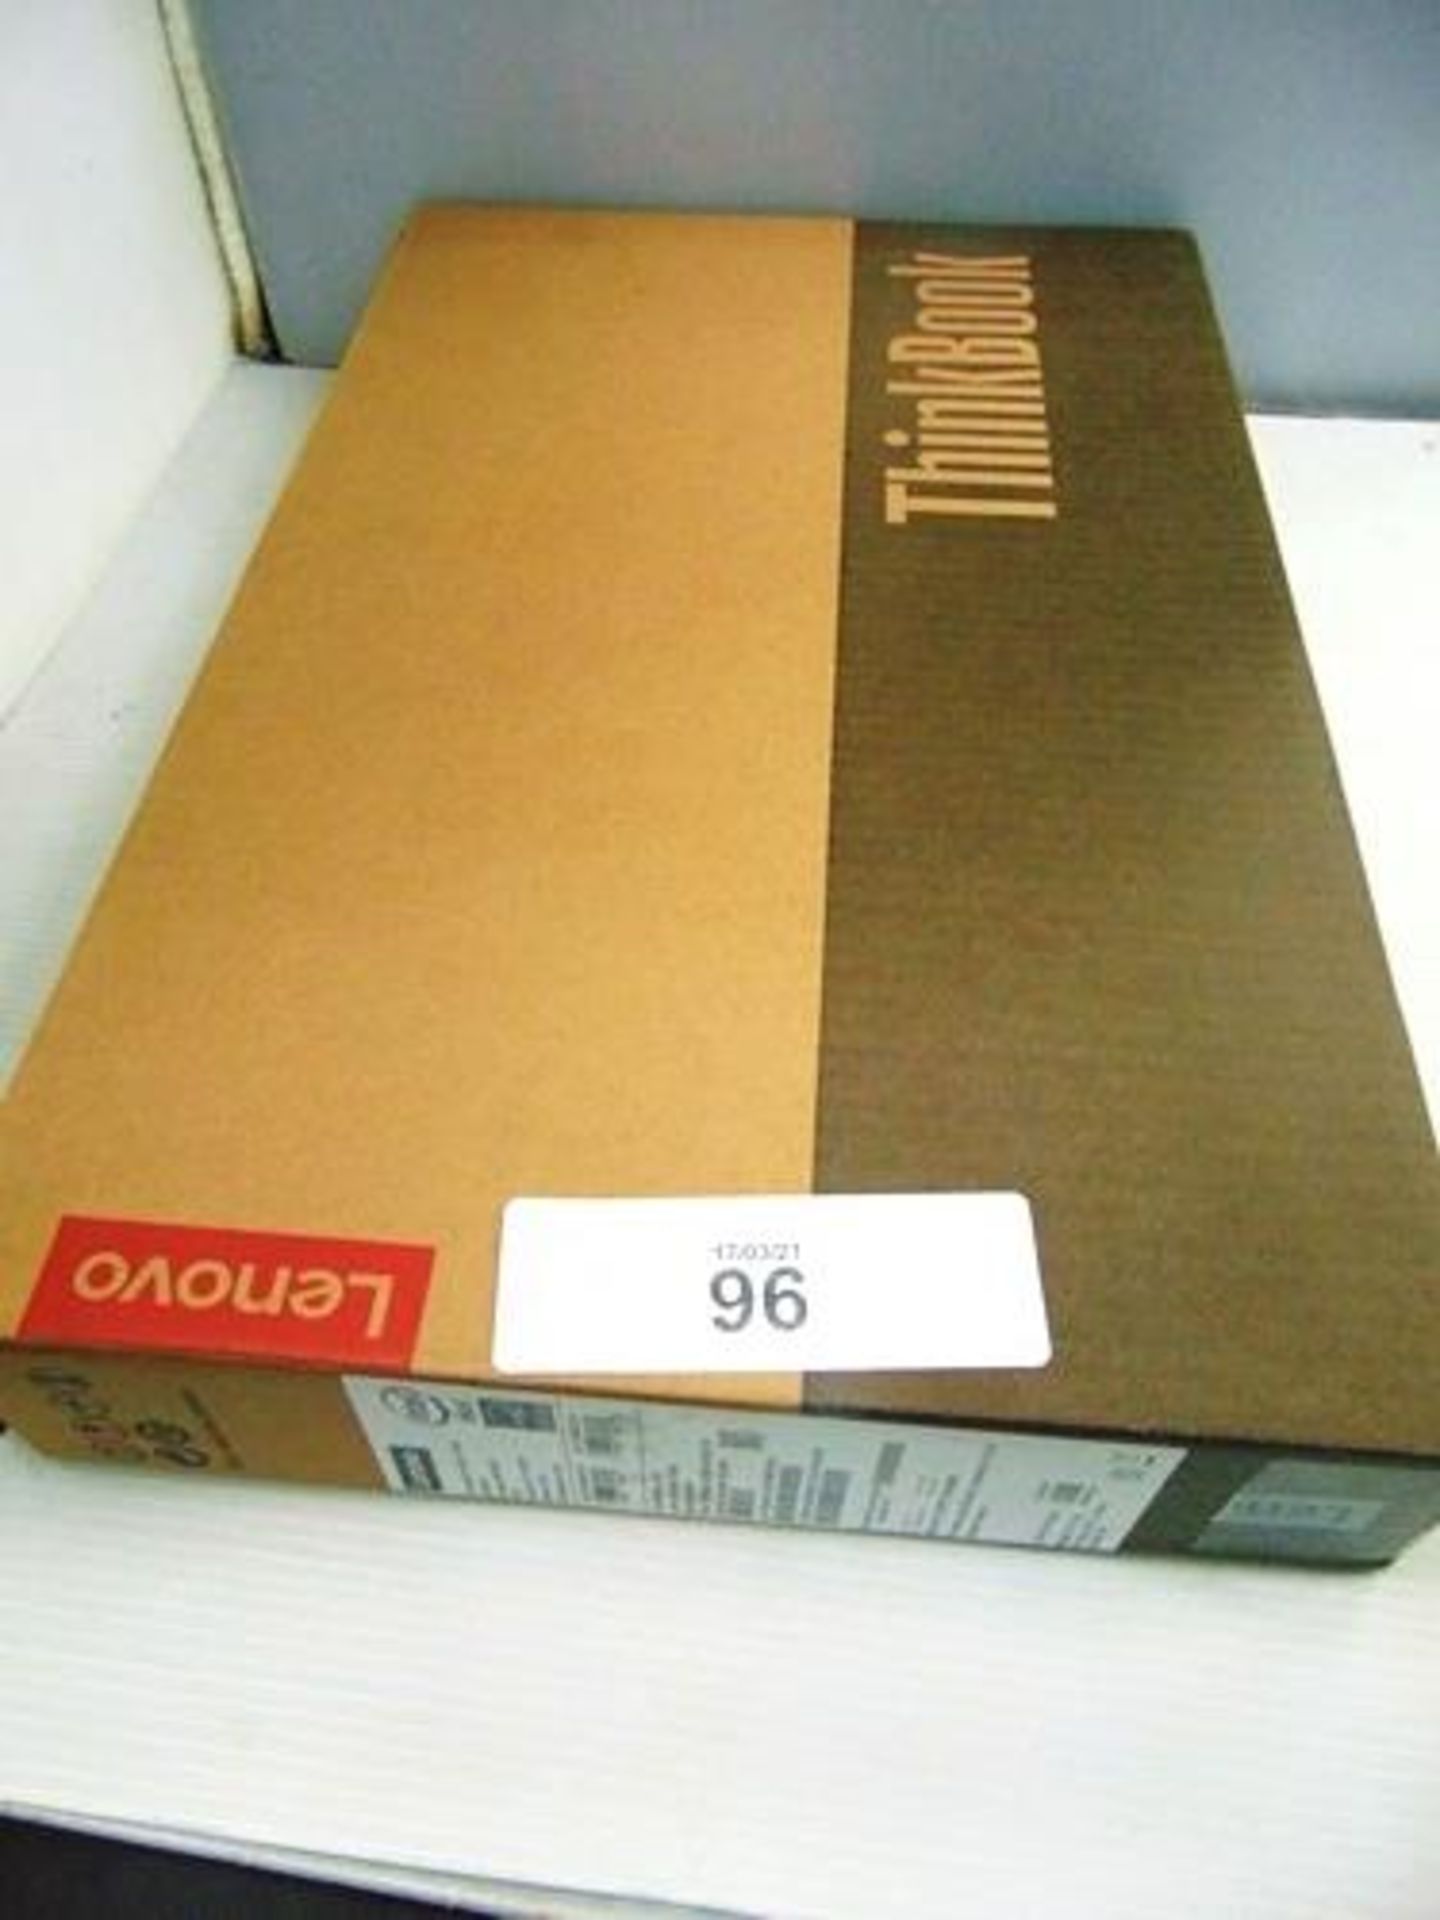 1 x Lenovo ThinkBook 13s laptop, i5 processor, model 20RR0007UK - New in box. This item has not been - Image 2 of 3